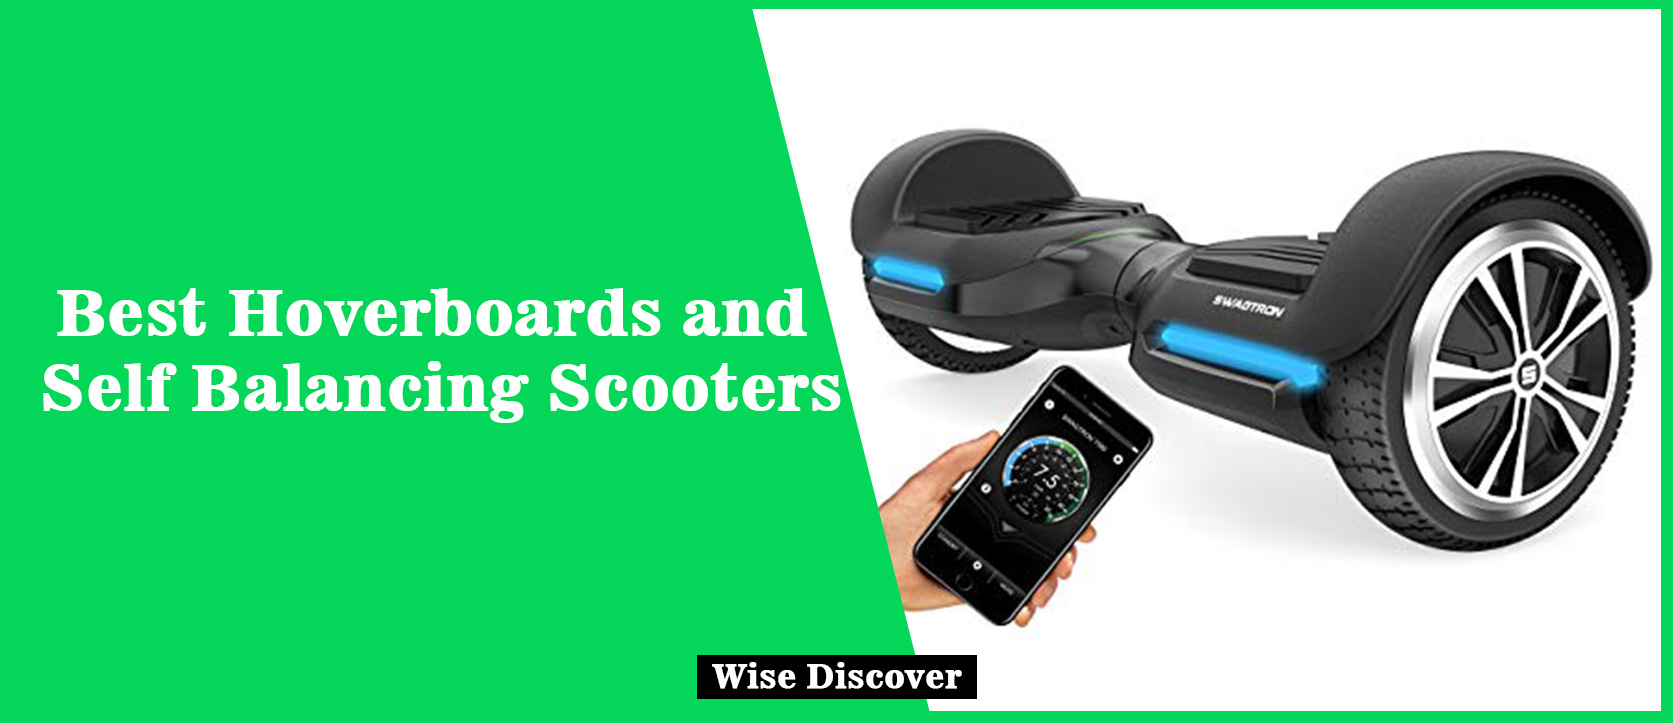 Best-Hoverboards-and-Self-Balancing-Scooters